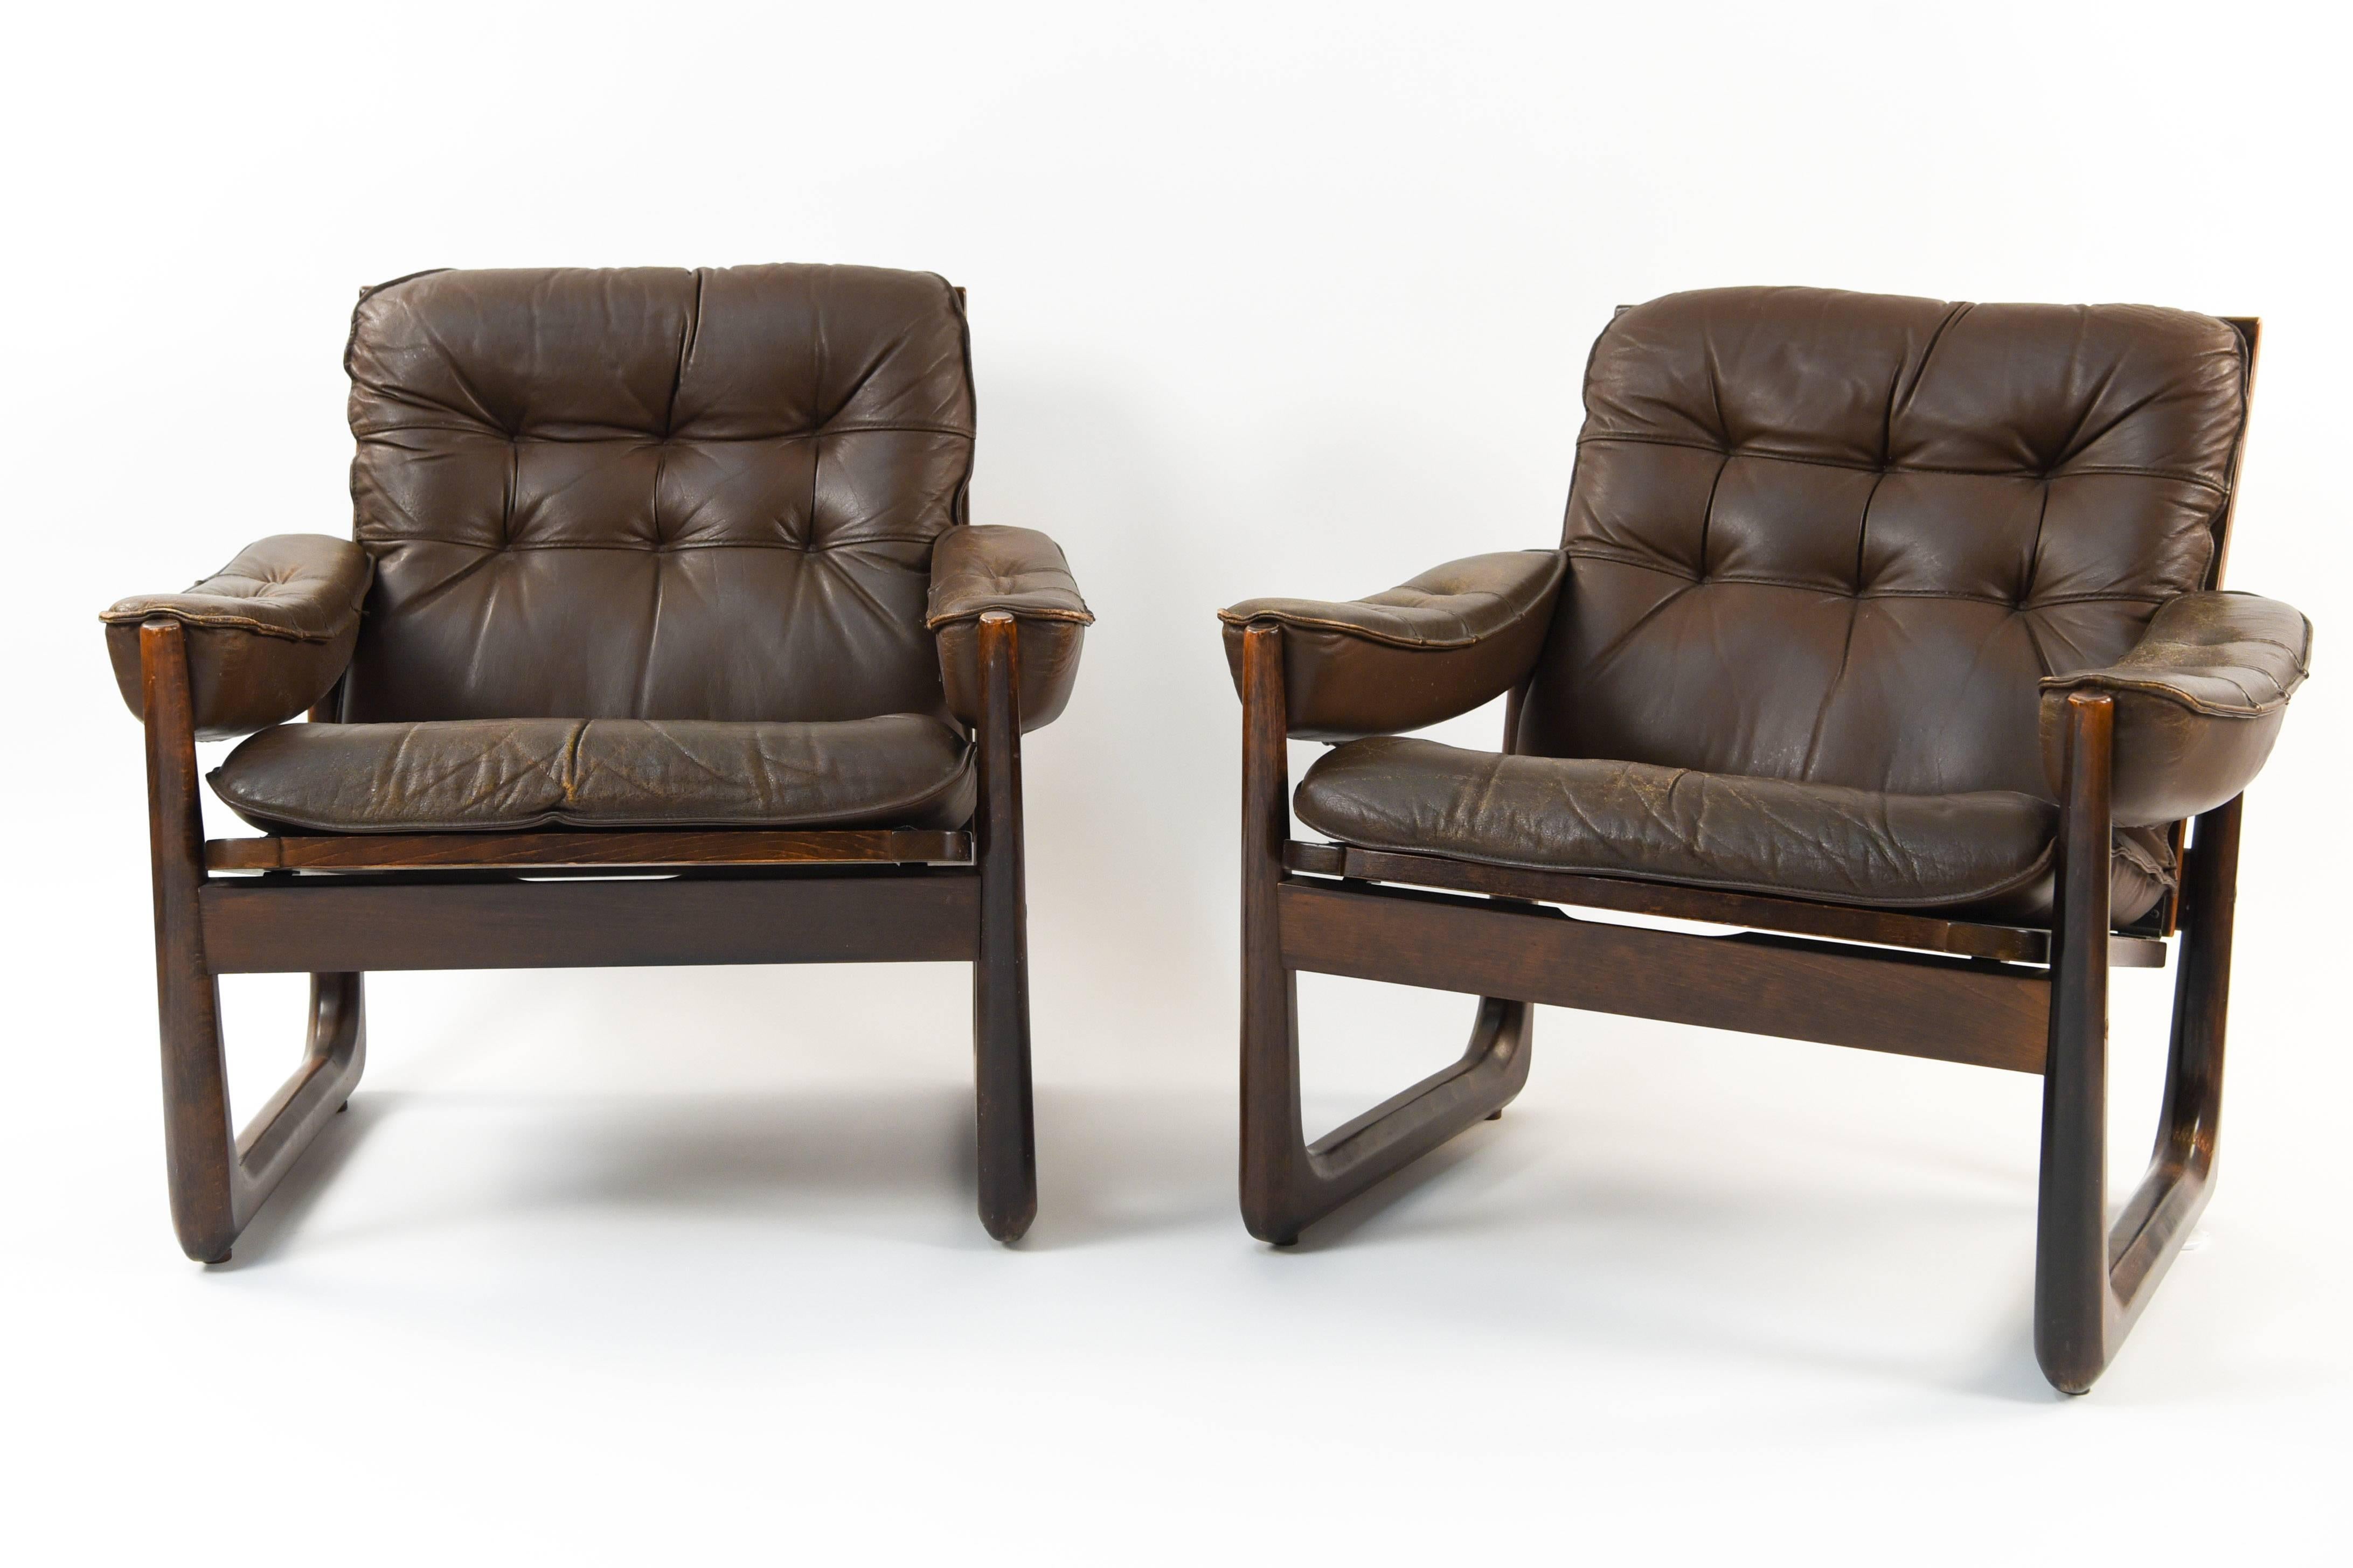 Designed by Oddvar Vad and produced by Vad Trævarefabrik, Norway. These lounge / armchairs feature tufted brown leather upholstery and stained beech frames. A great example of Scandinavian modern design, circa 1970s.